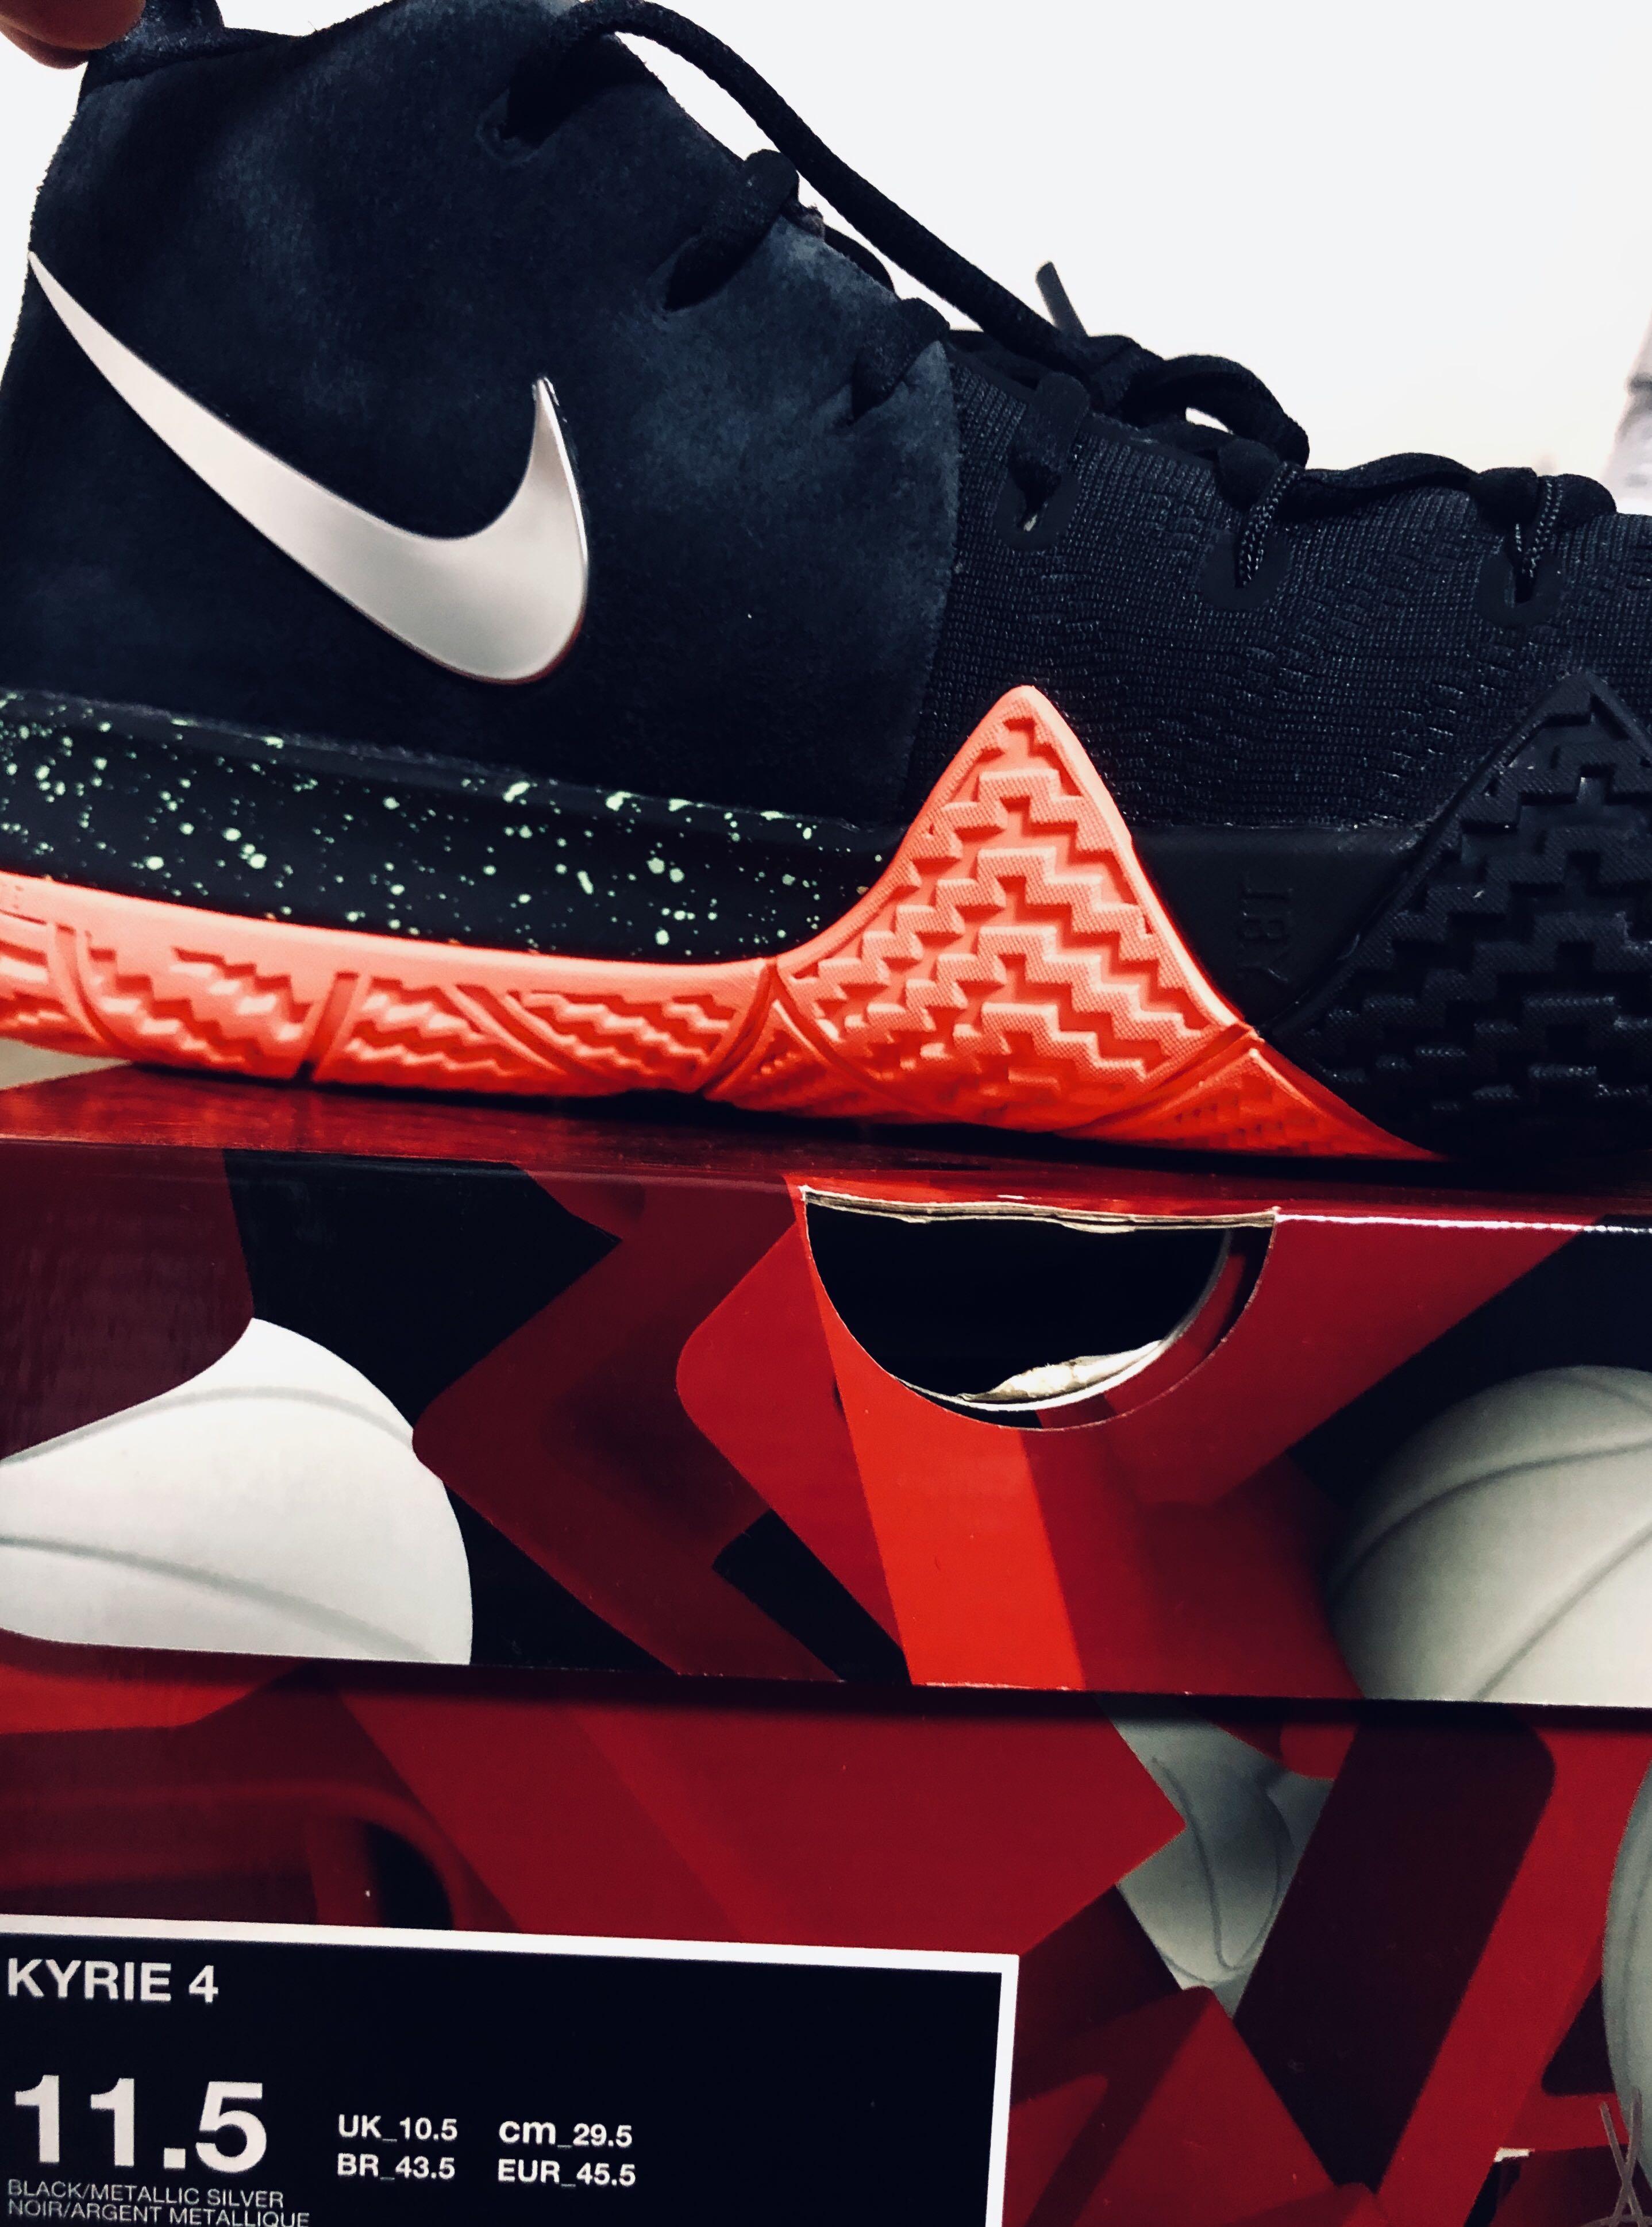 Basketball Shoes Kyrie 4, Sports 